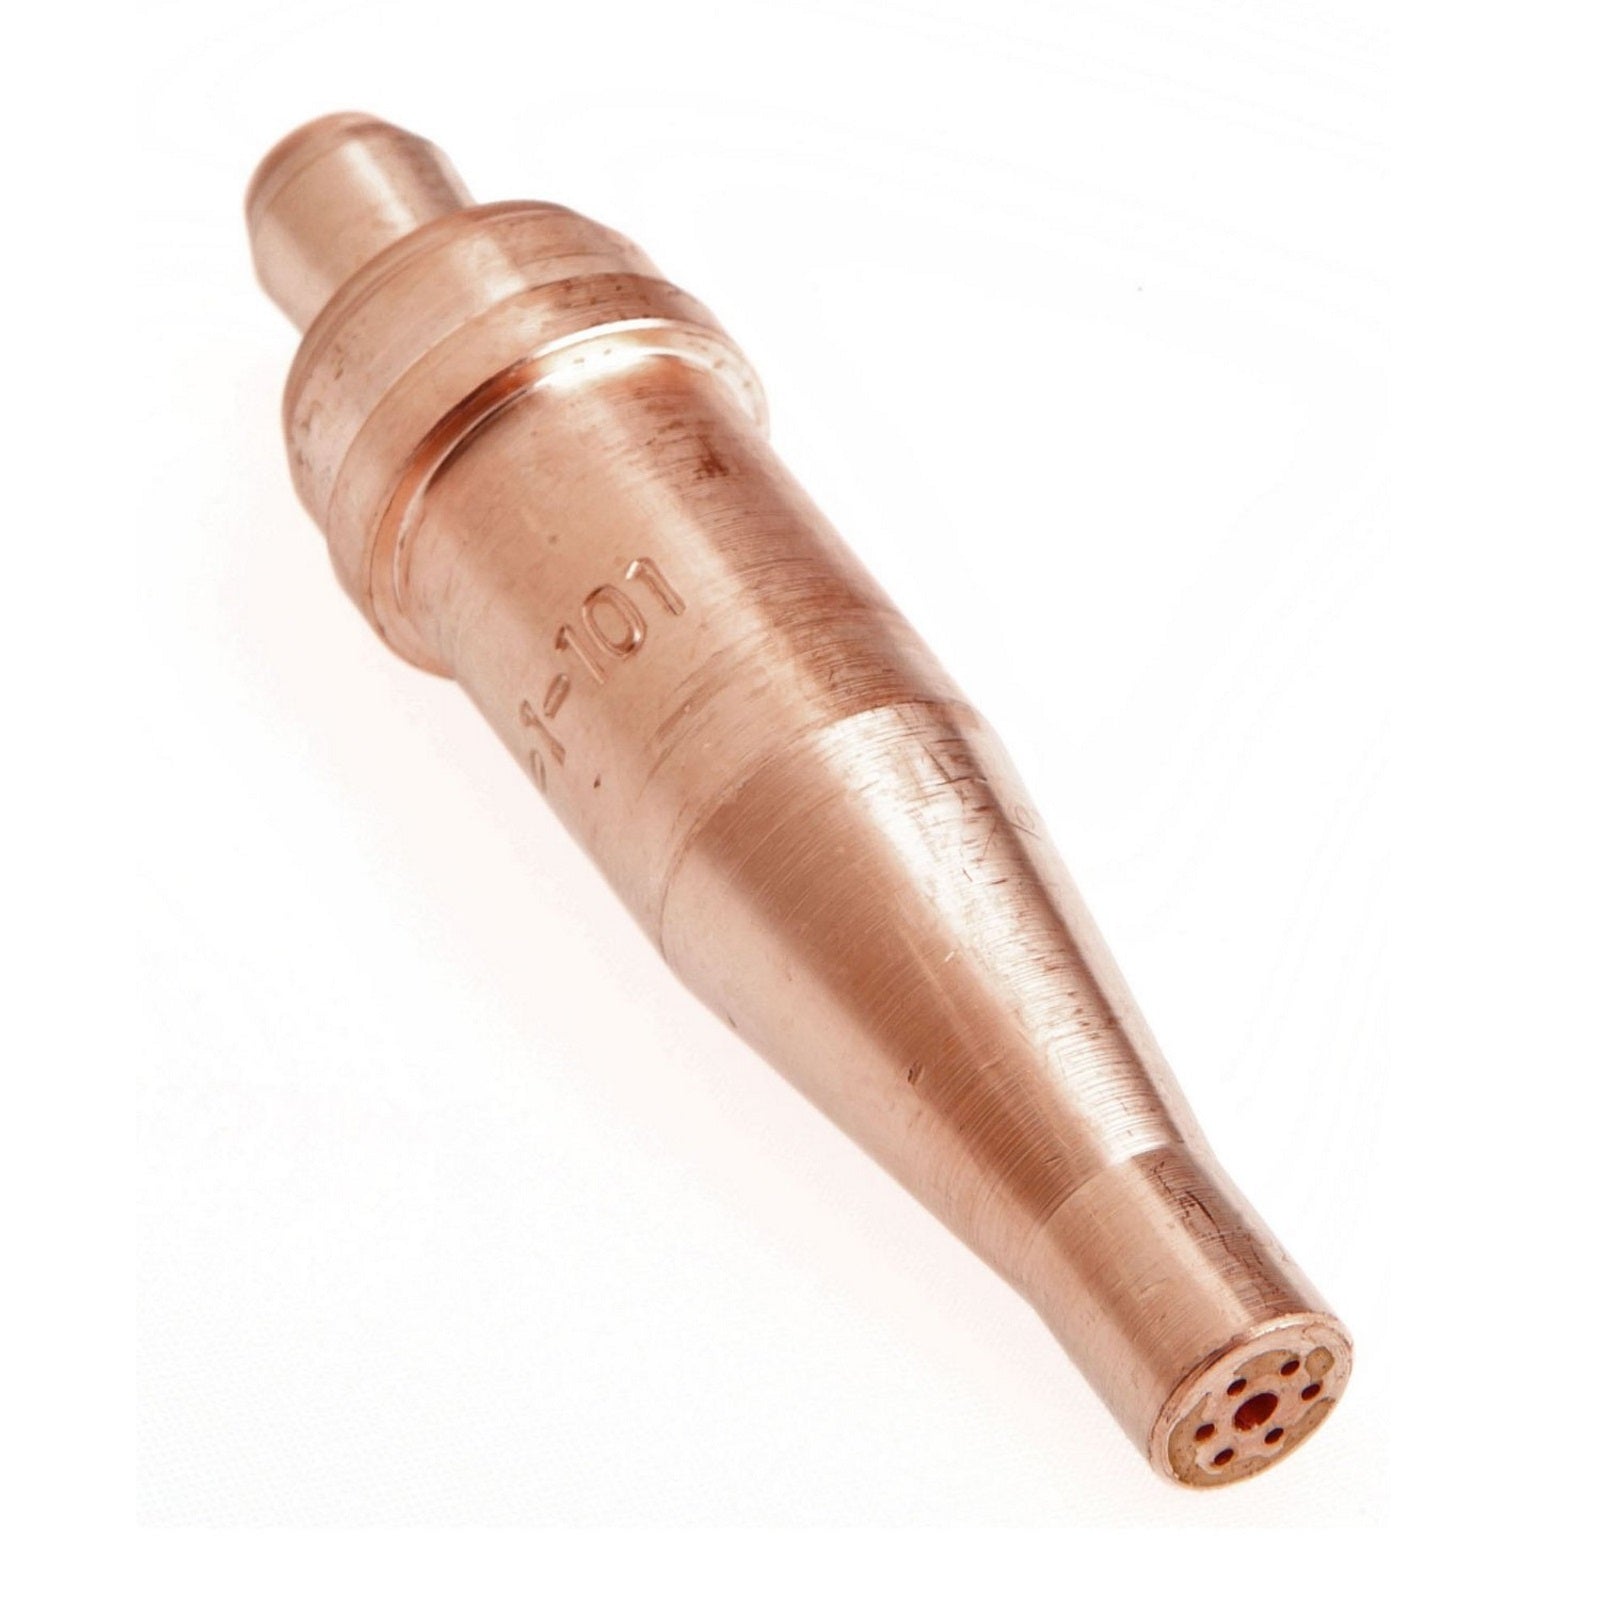 Victor Series 1 Type 101 Acetylene Cutting Tip - Size 5 (0330-0008)